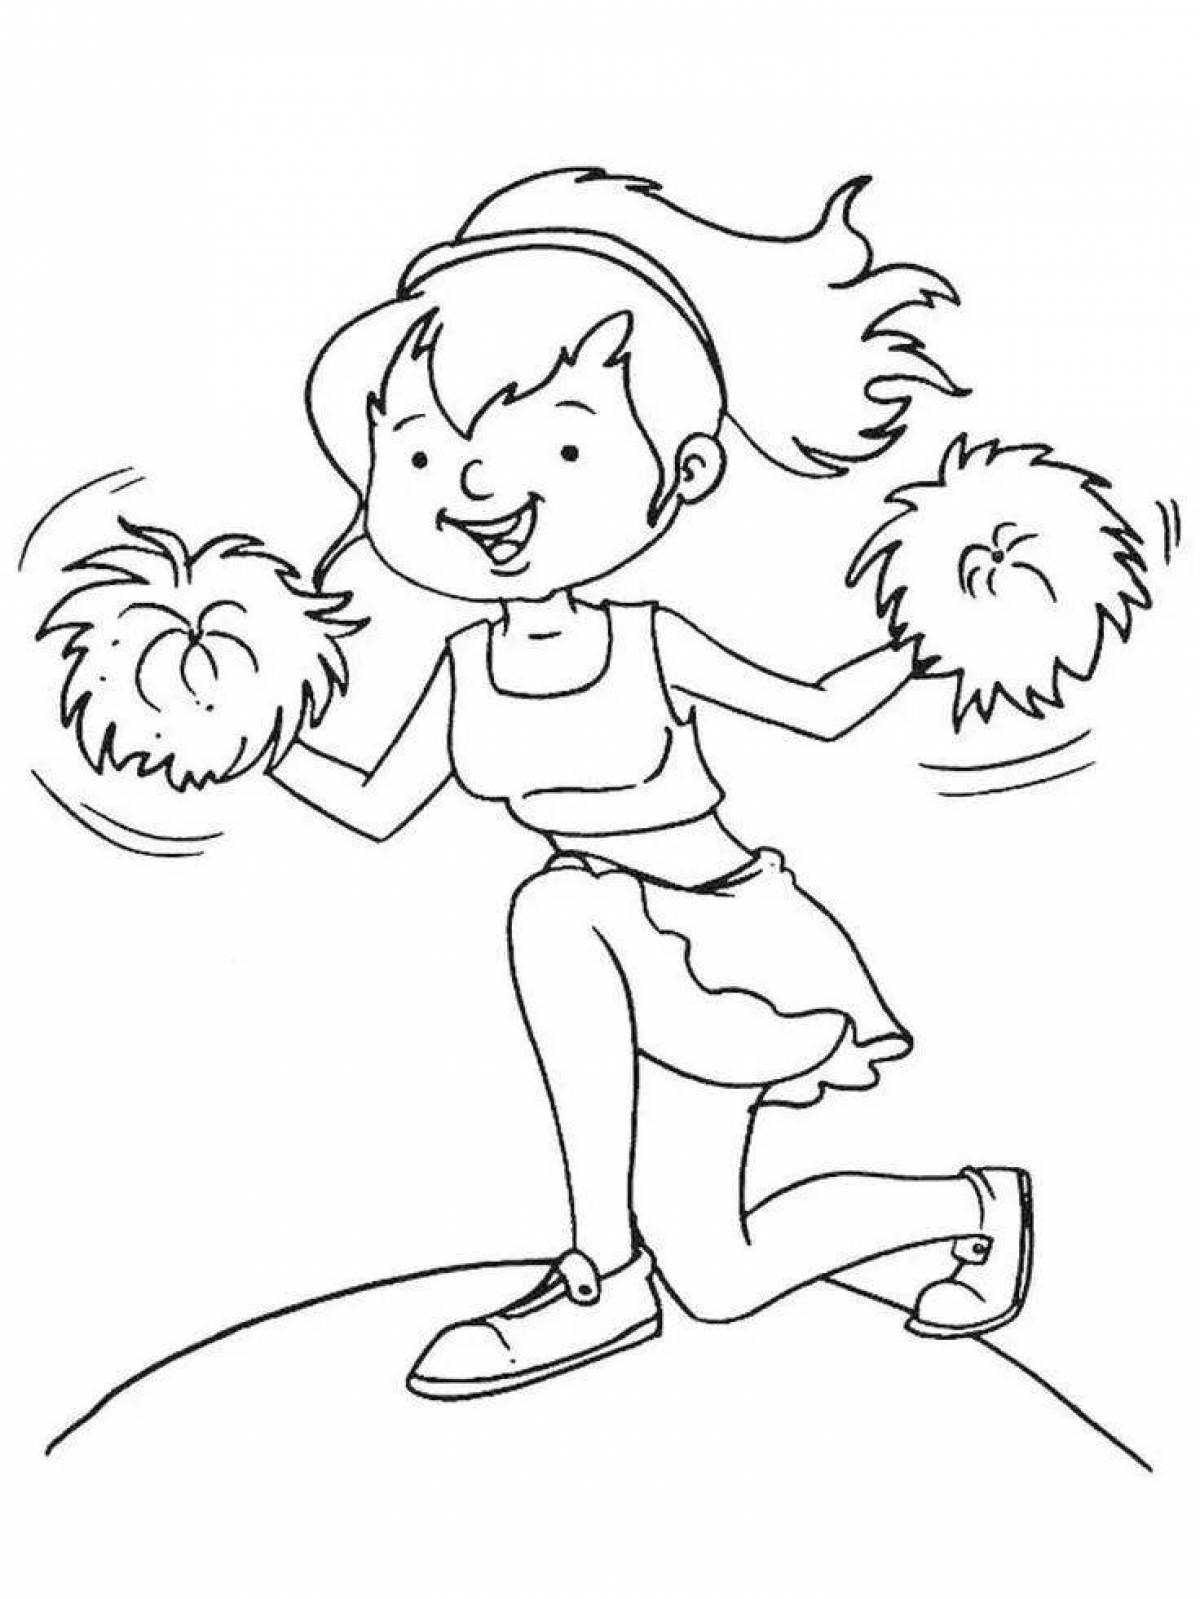 Great cheerleading coloring page